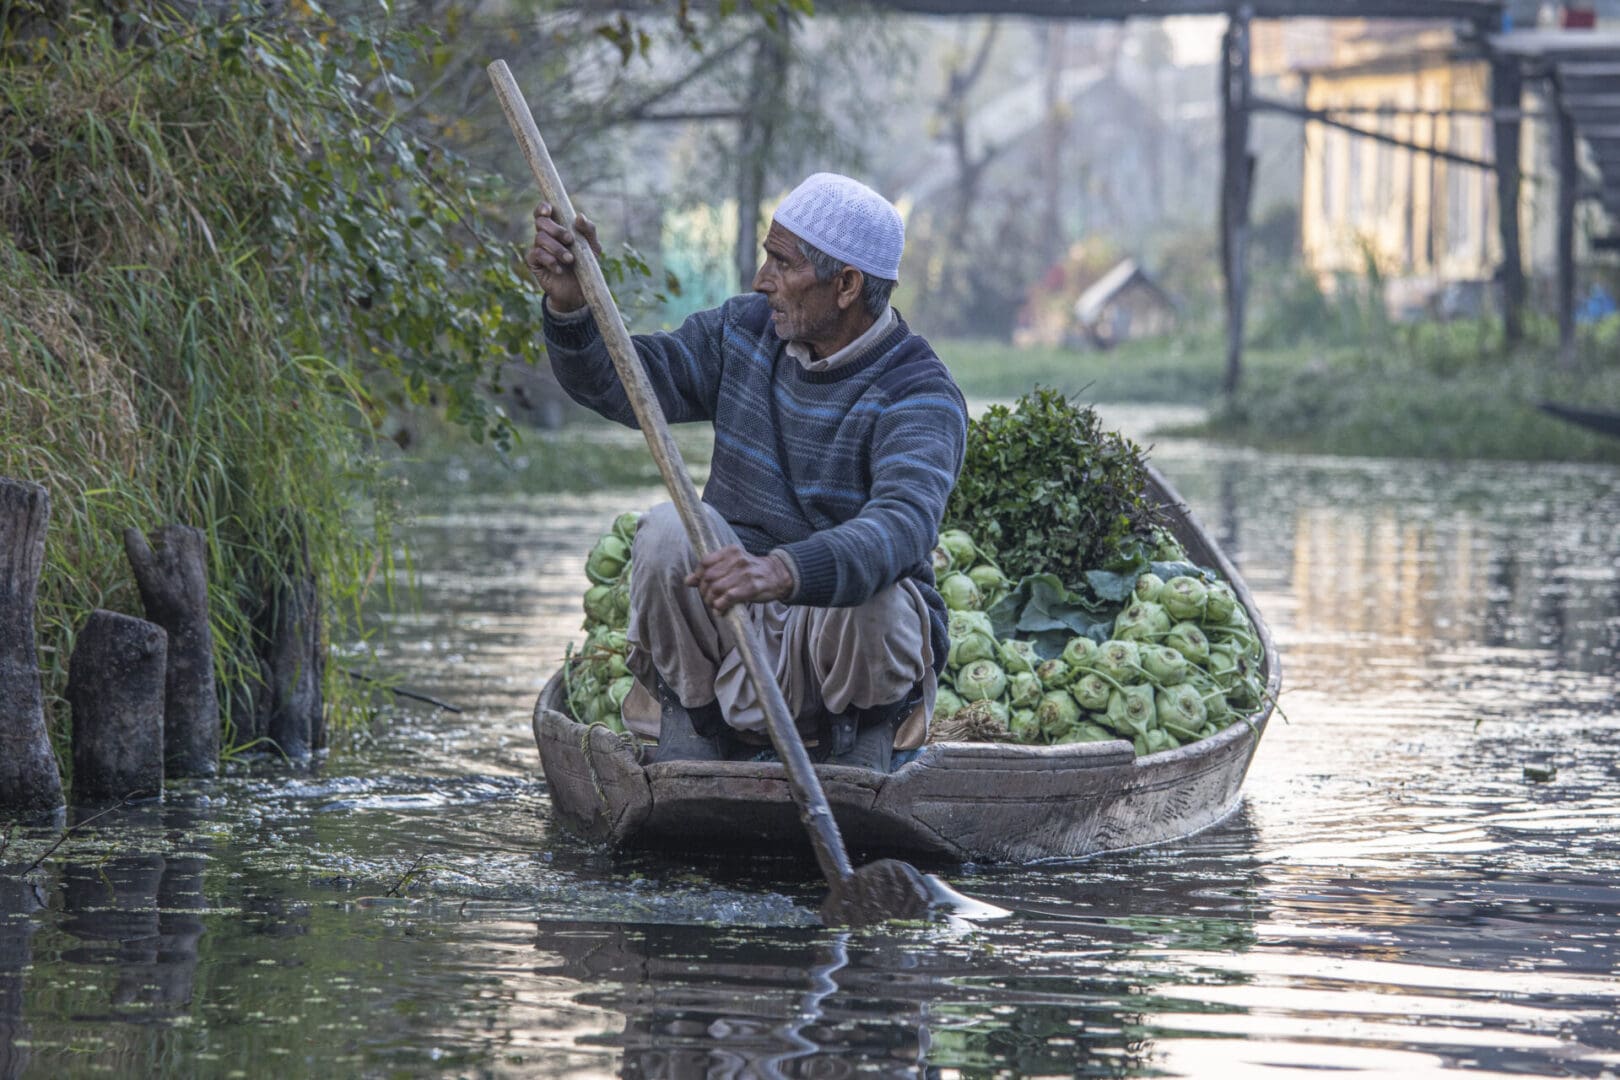 A man is paddling a boat full of vegetables.